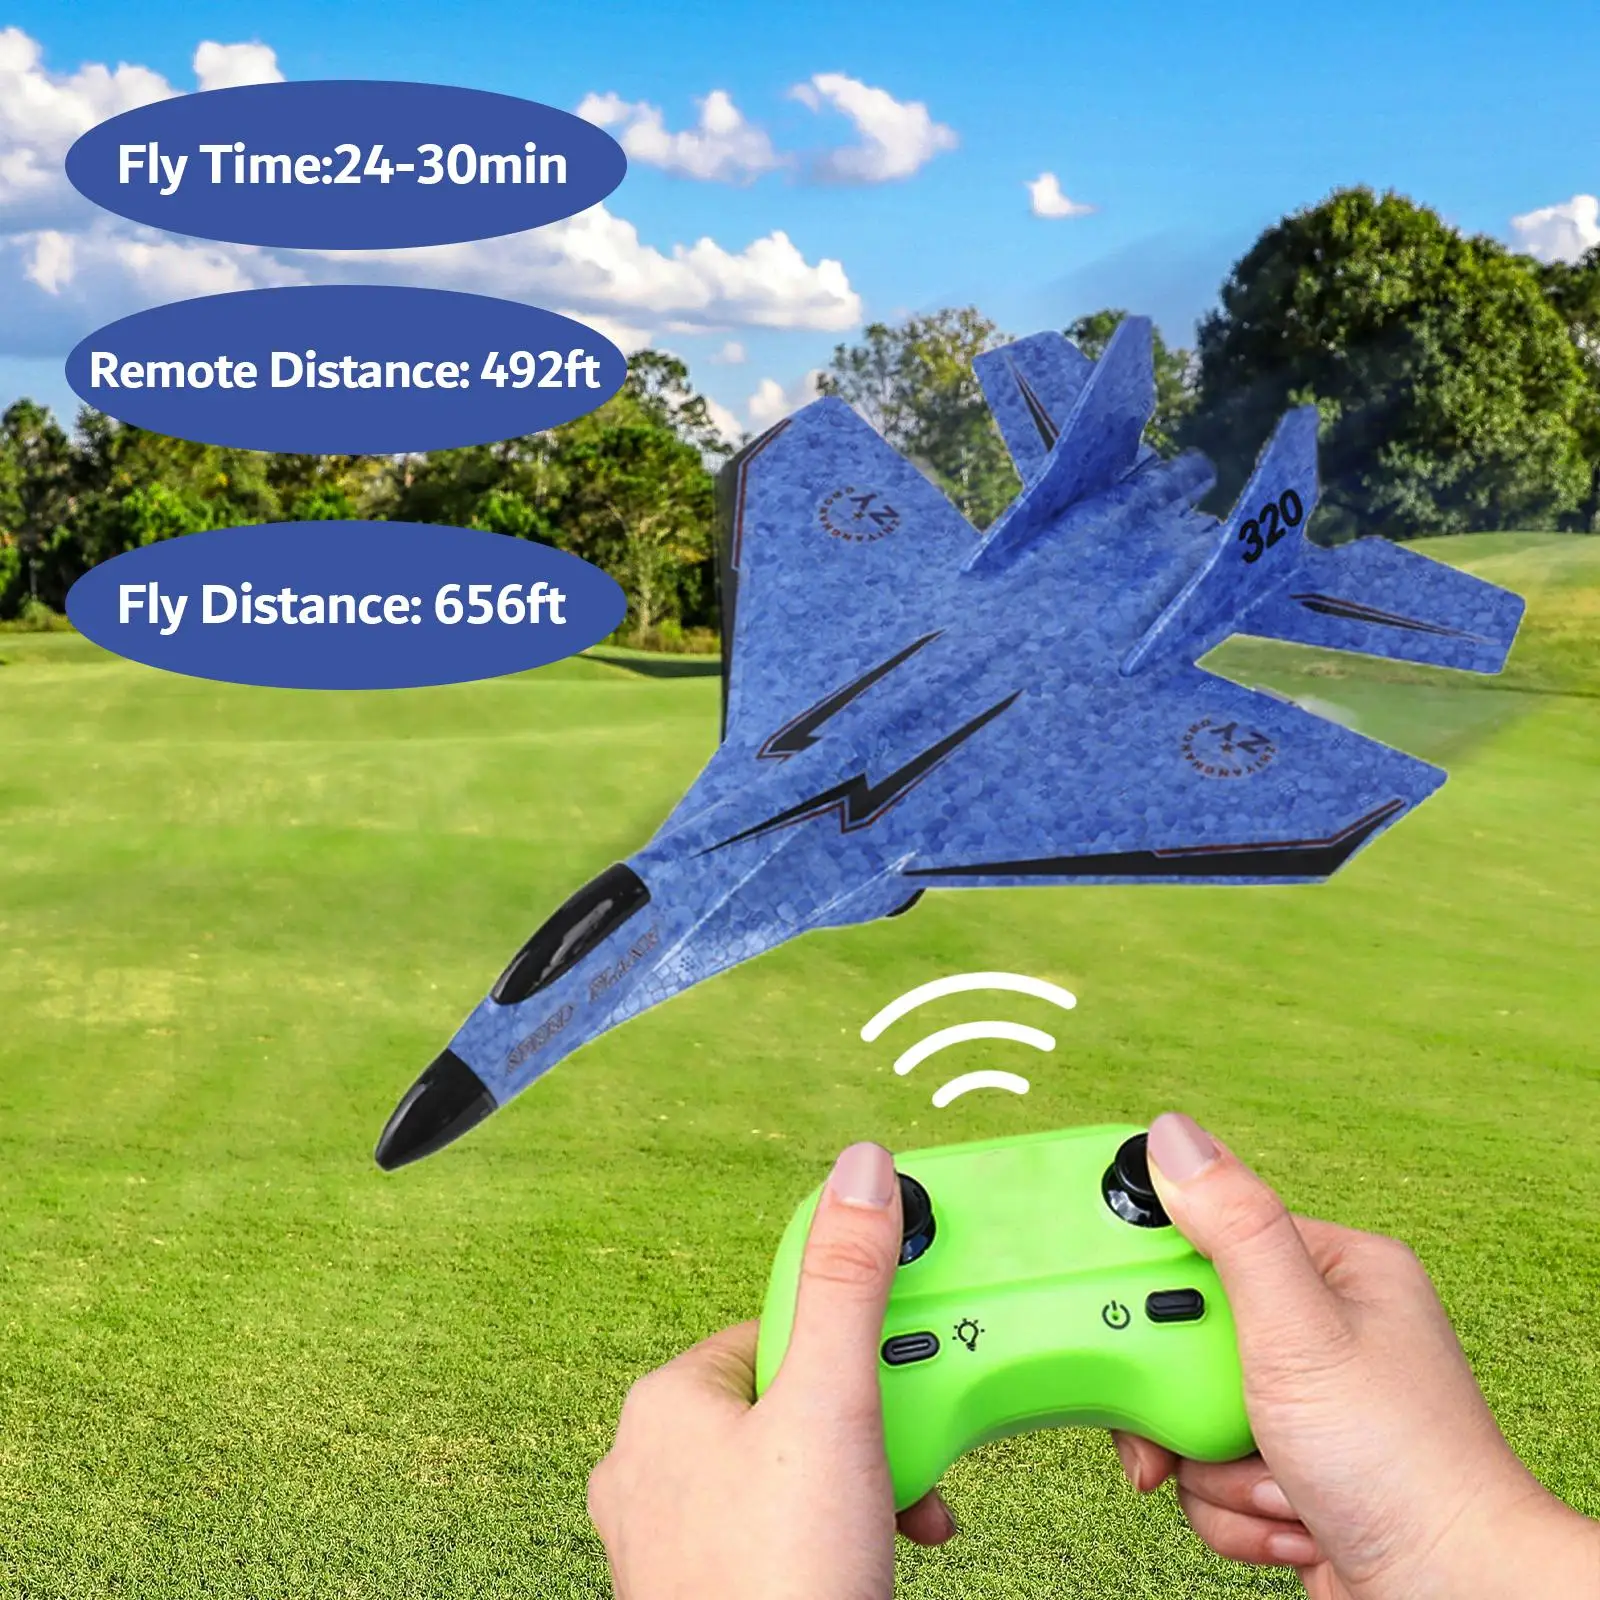 Foam Plane Jet Fighter to Fly Remote Control Aircraft Fixed Wing Aircraft RC Glider Plane Birthday Gift Outdoor Toy